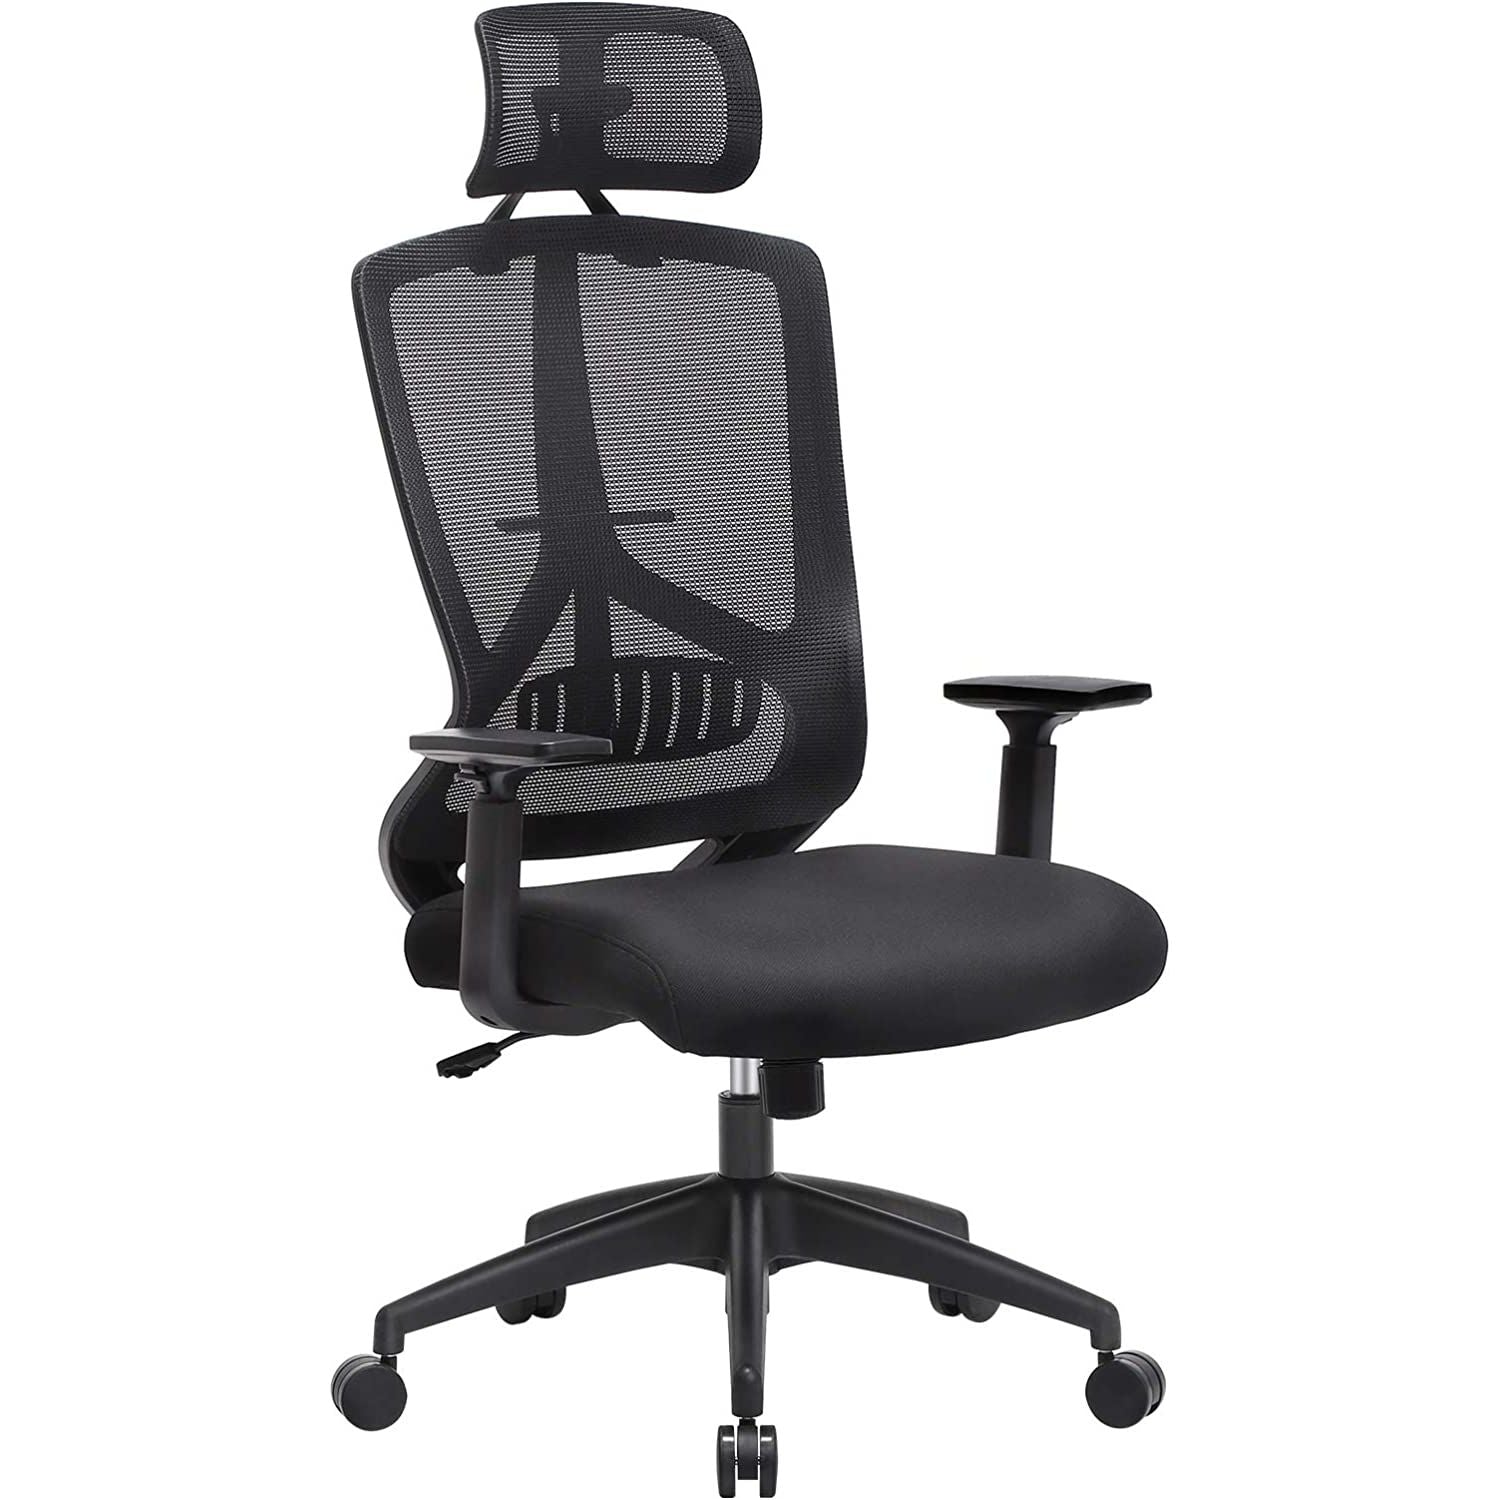 Ergonomic office chair with lumbar support